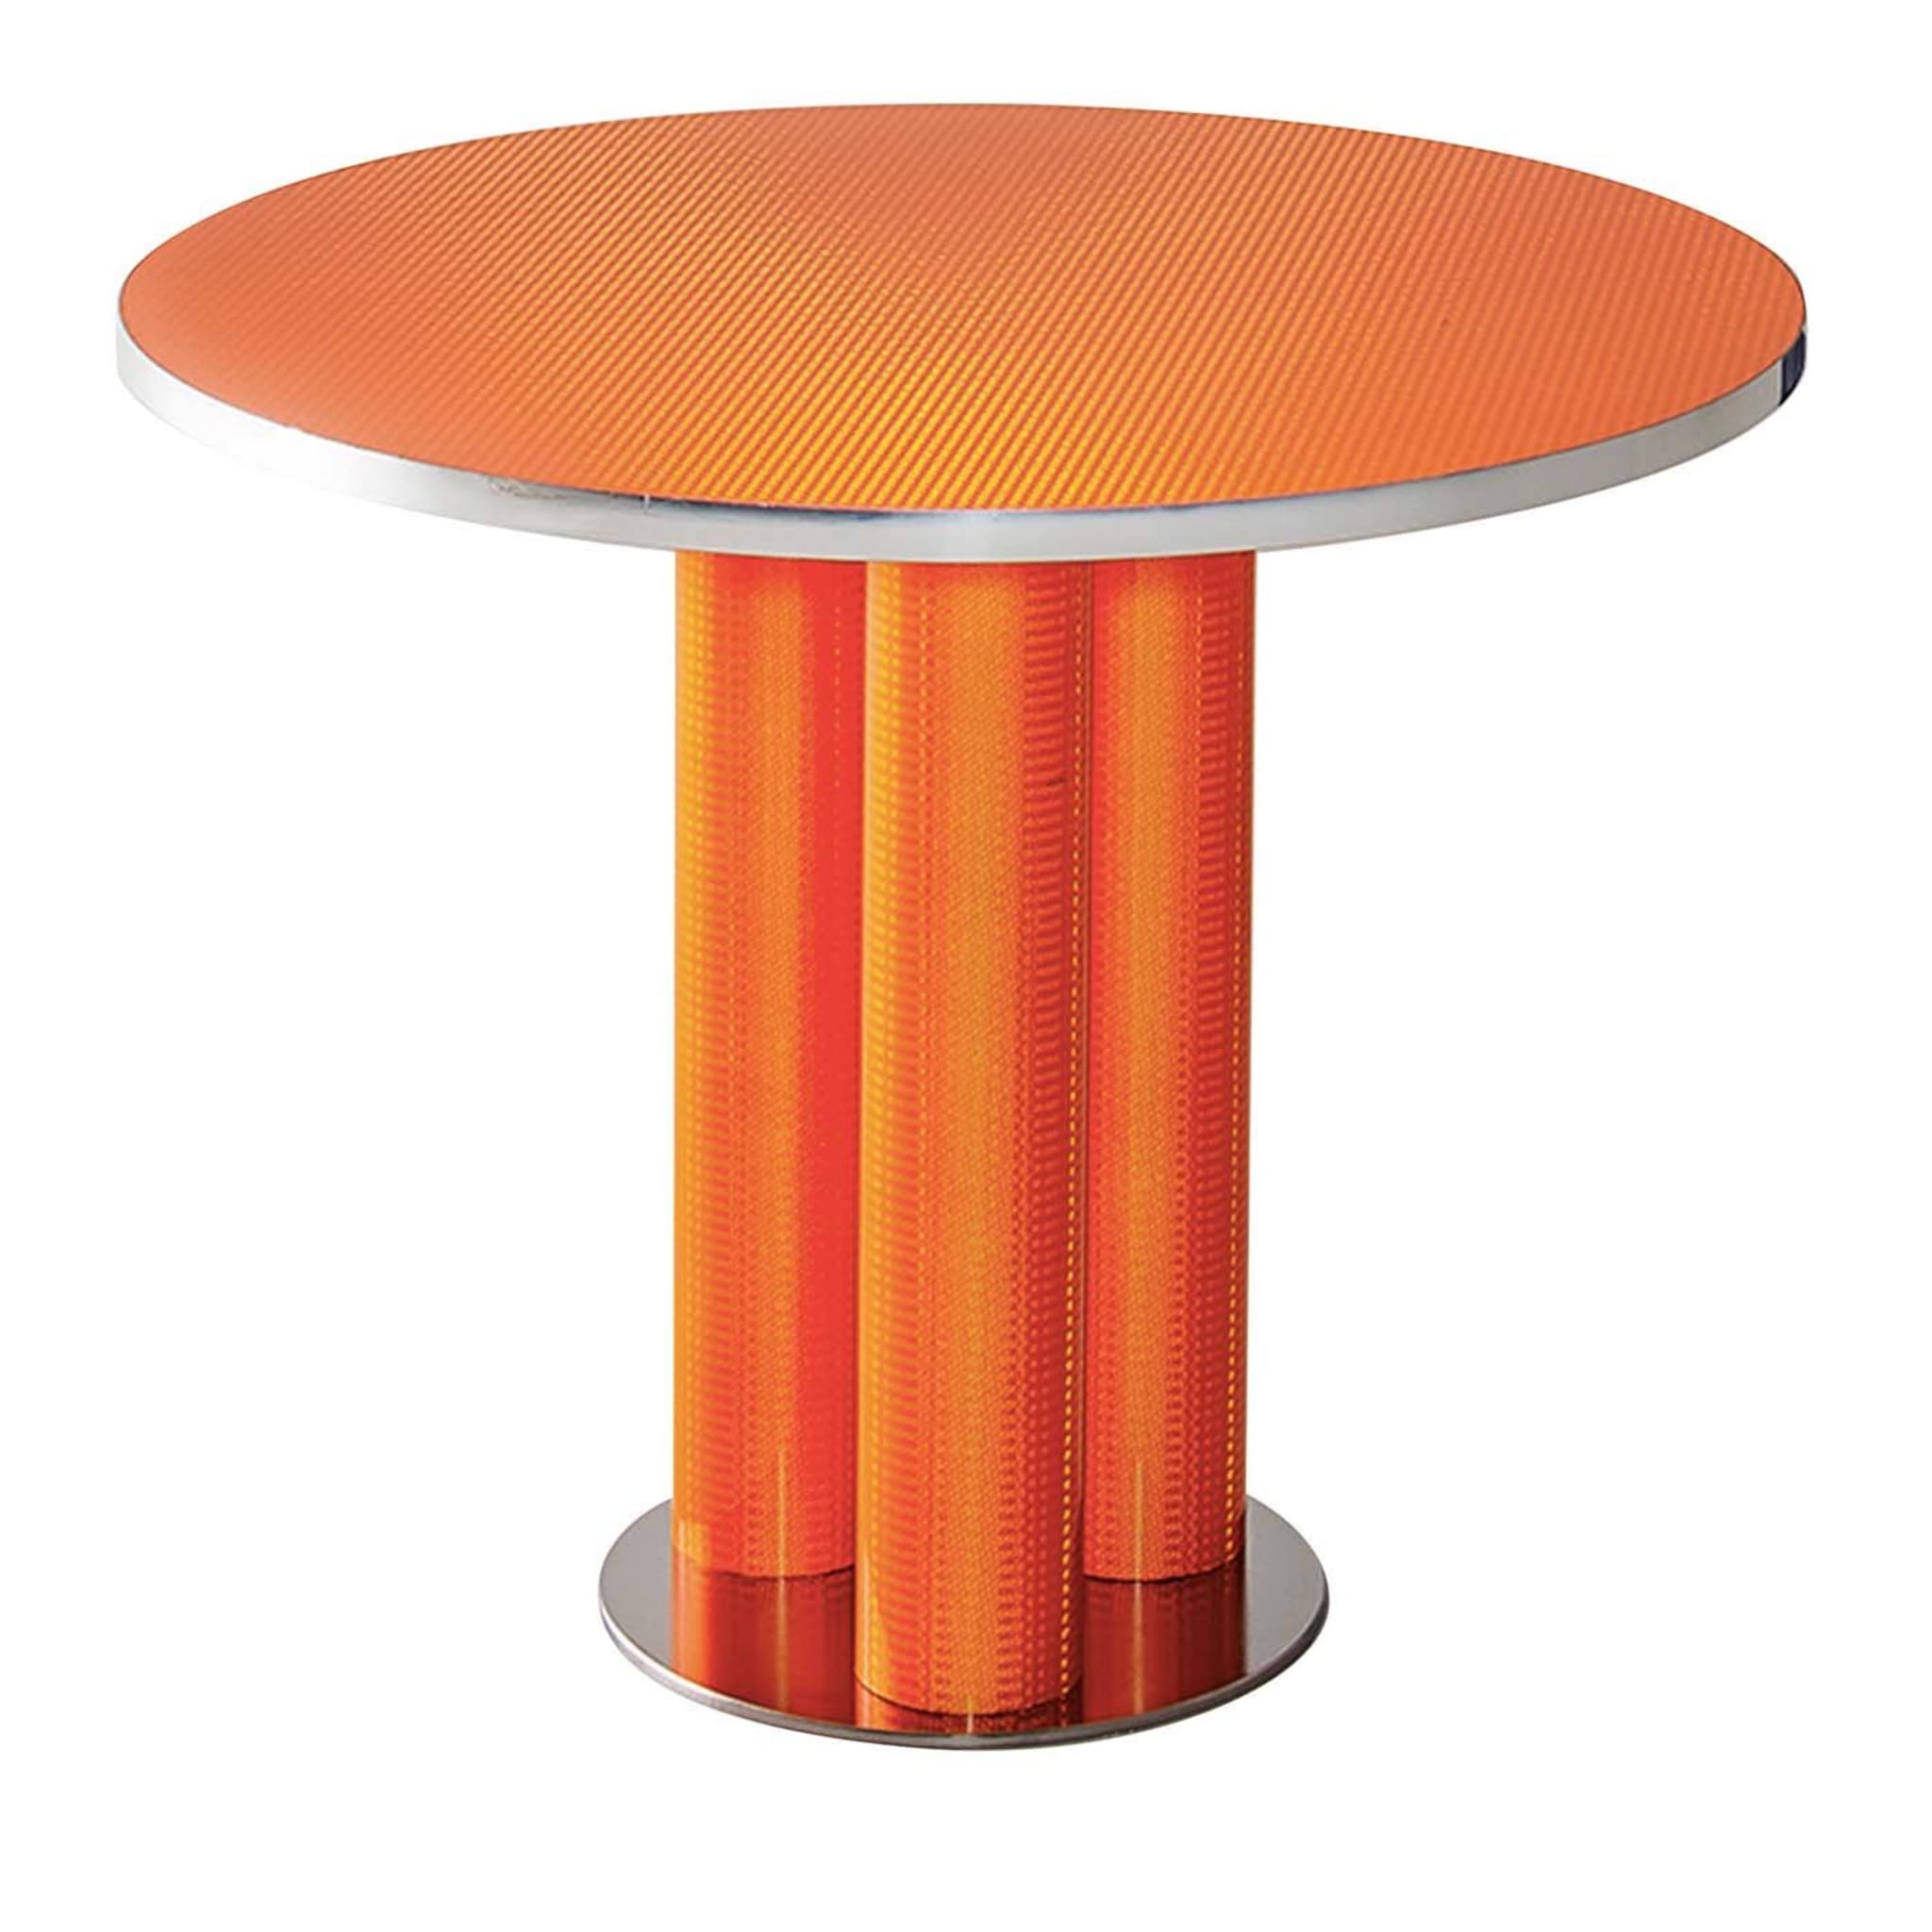 Reflective Collection - round Bistro table - Main view